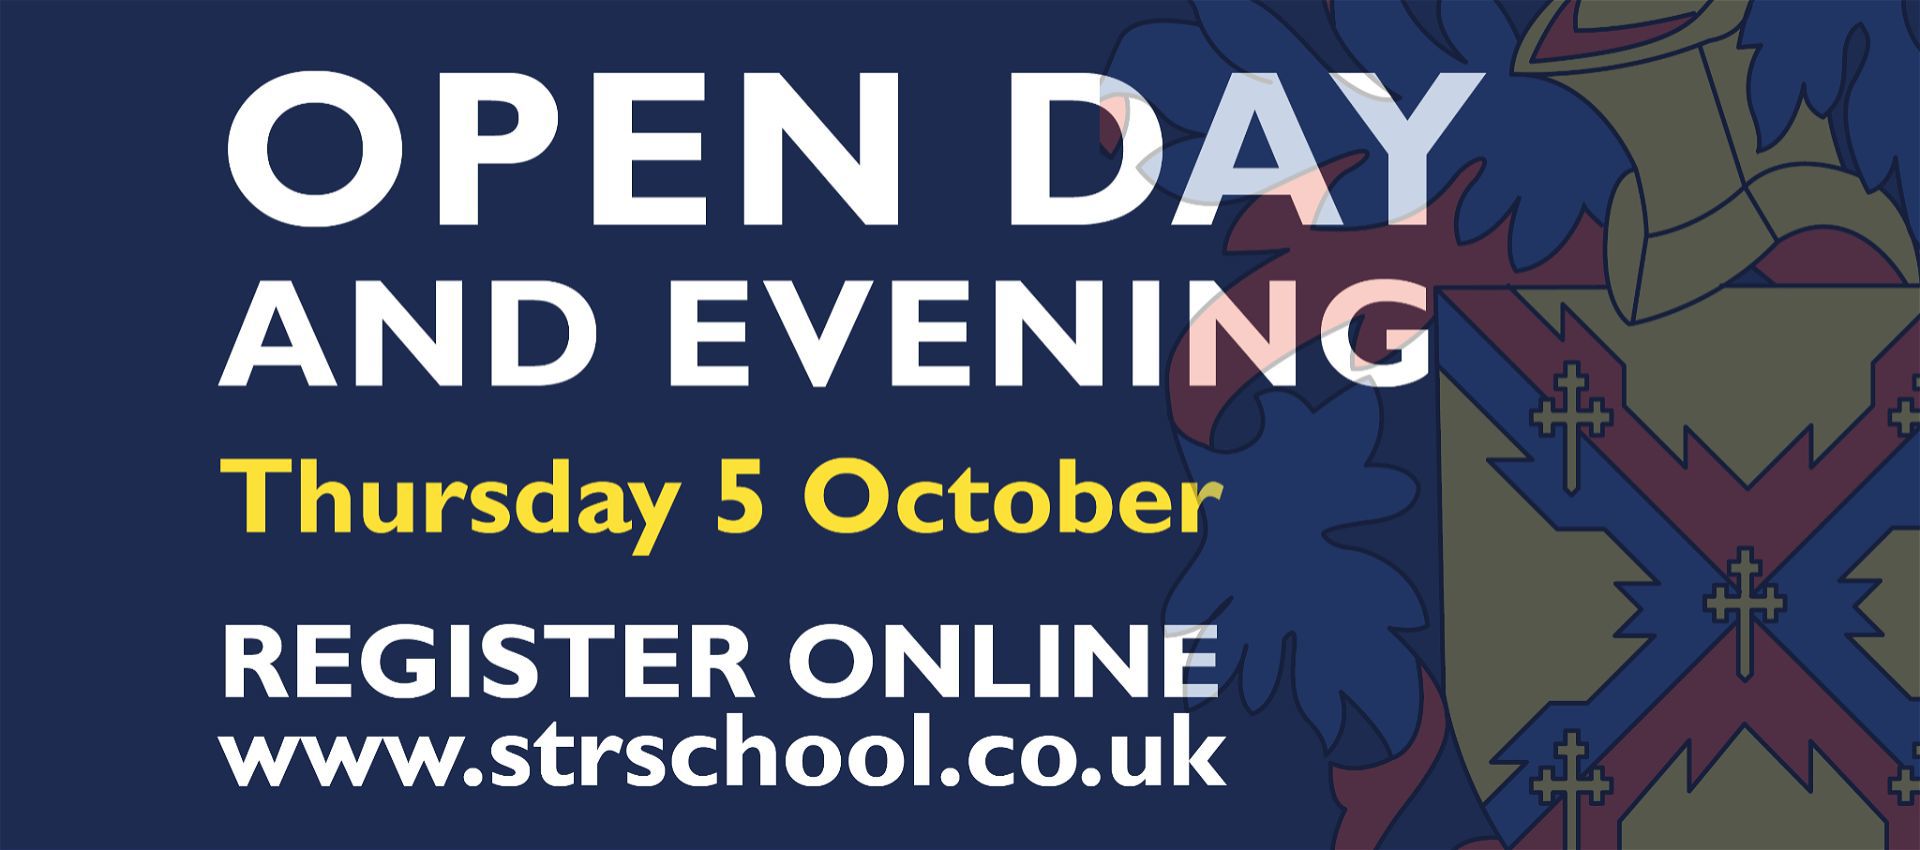 Open Day and Evening 5 October - Registration Open